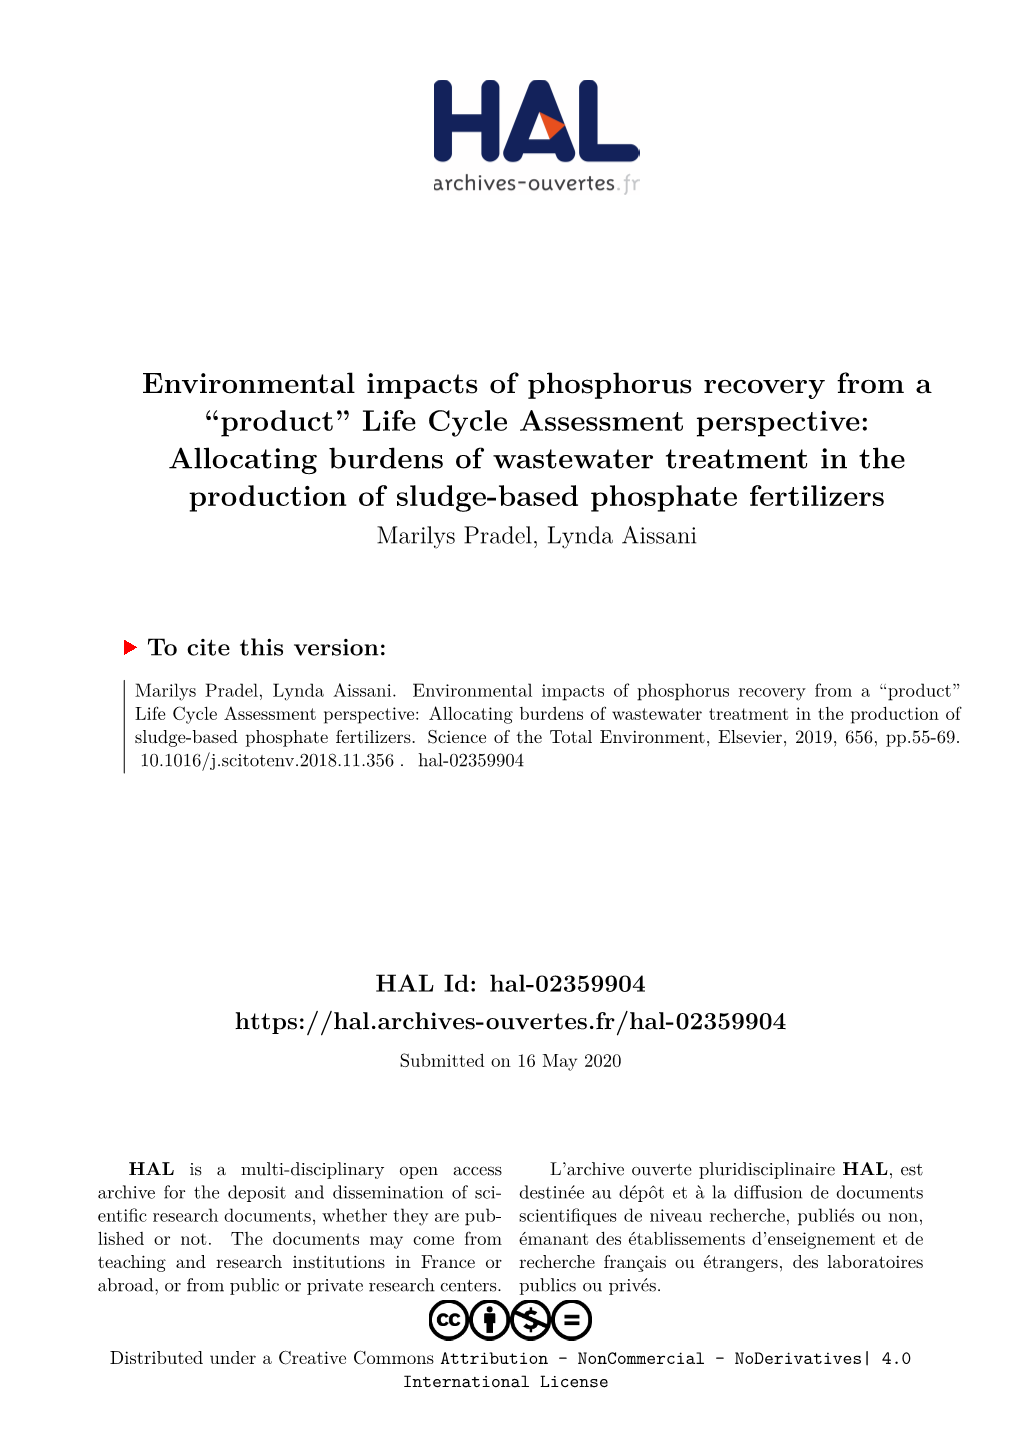 Environmental Impacts of Phosphorus Recovery from a ``Product